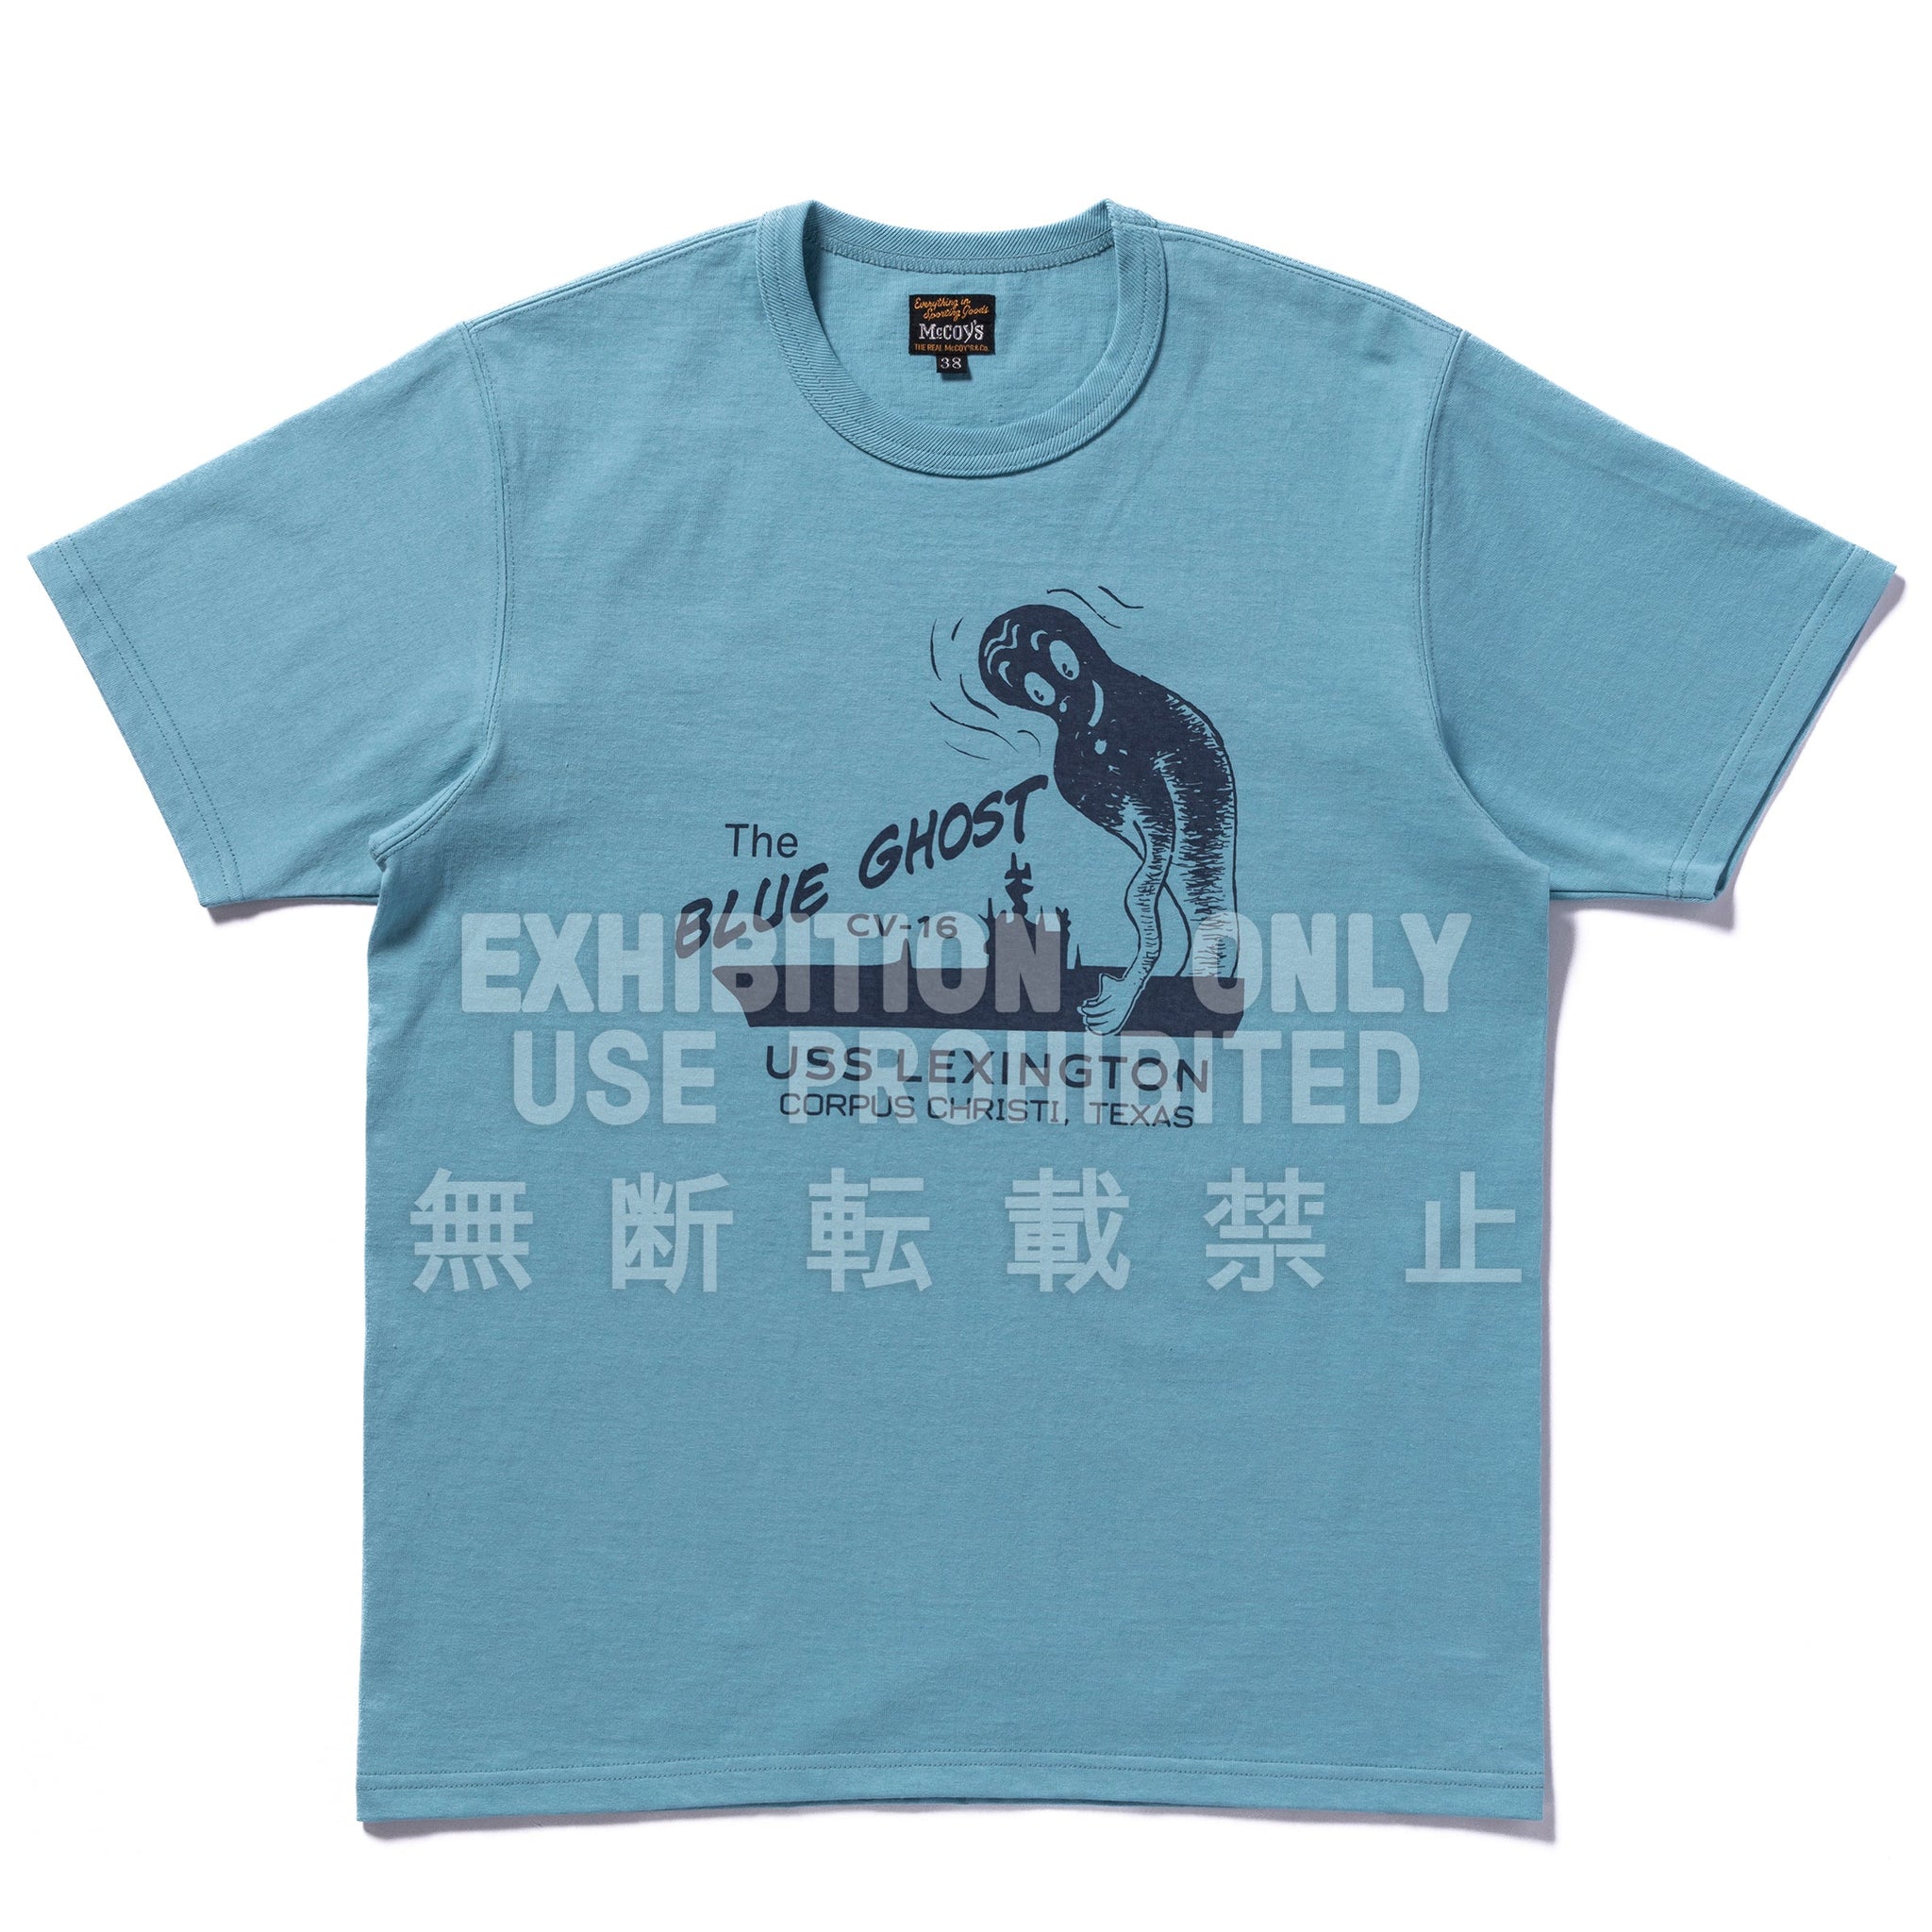 MILITARY TEE / THE BLUE GHOST